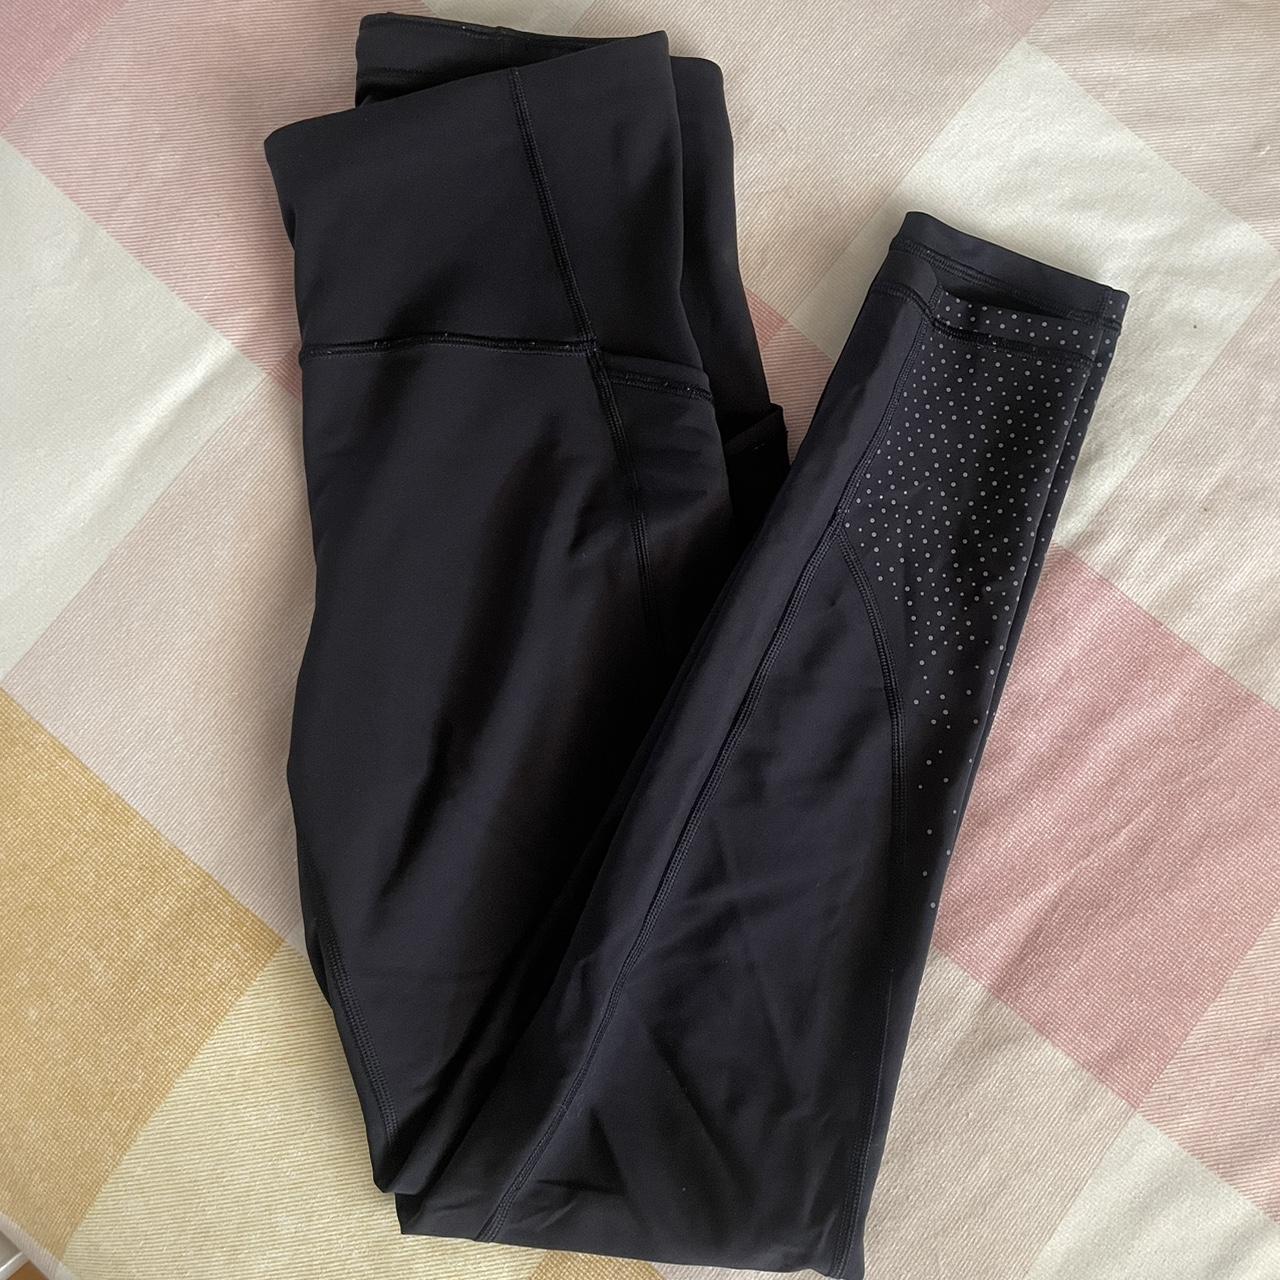 Lululemon leggings In very good condition although... - Depop